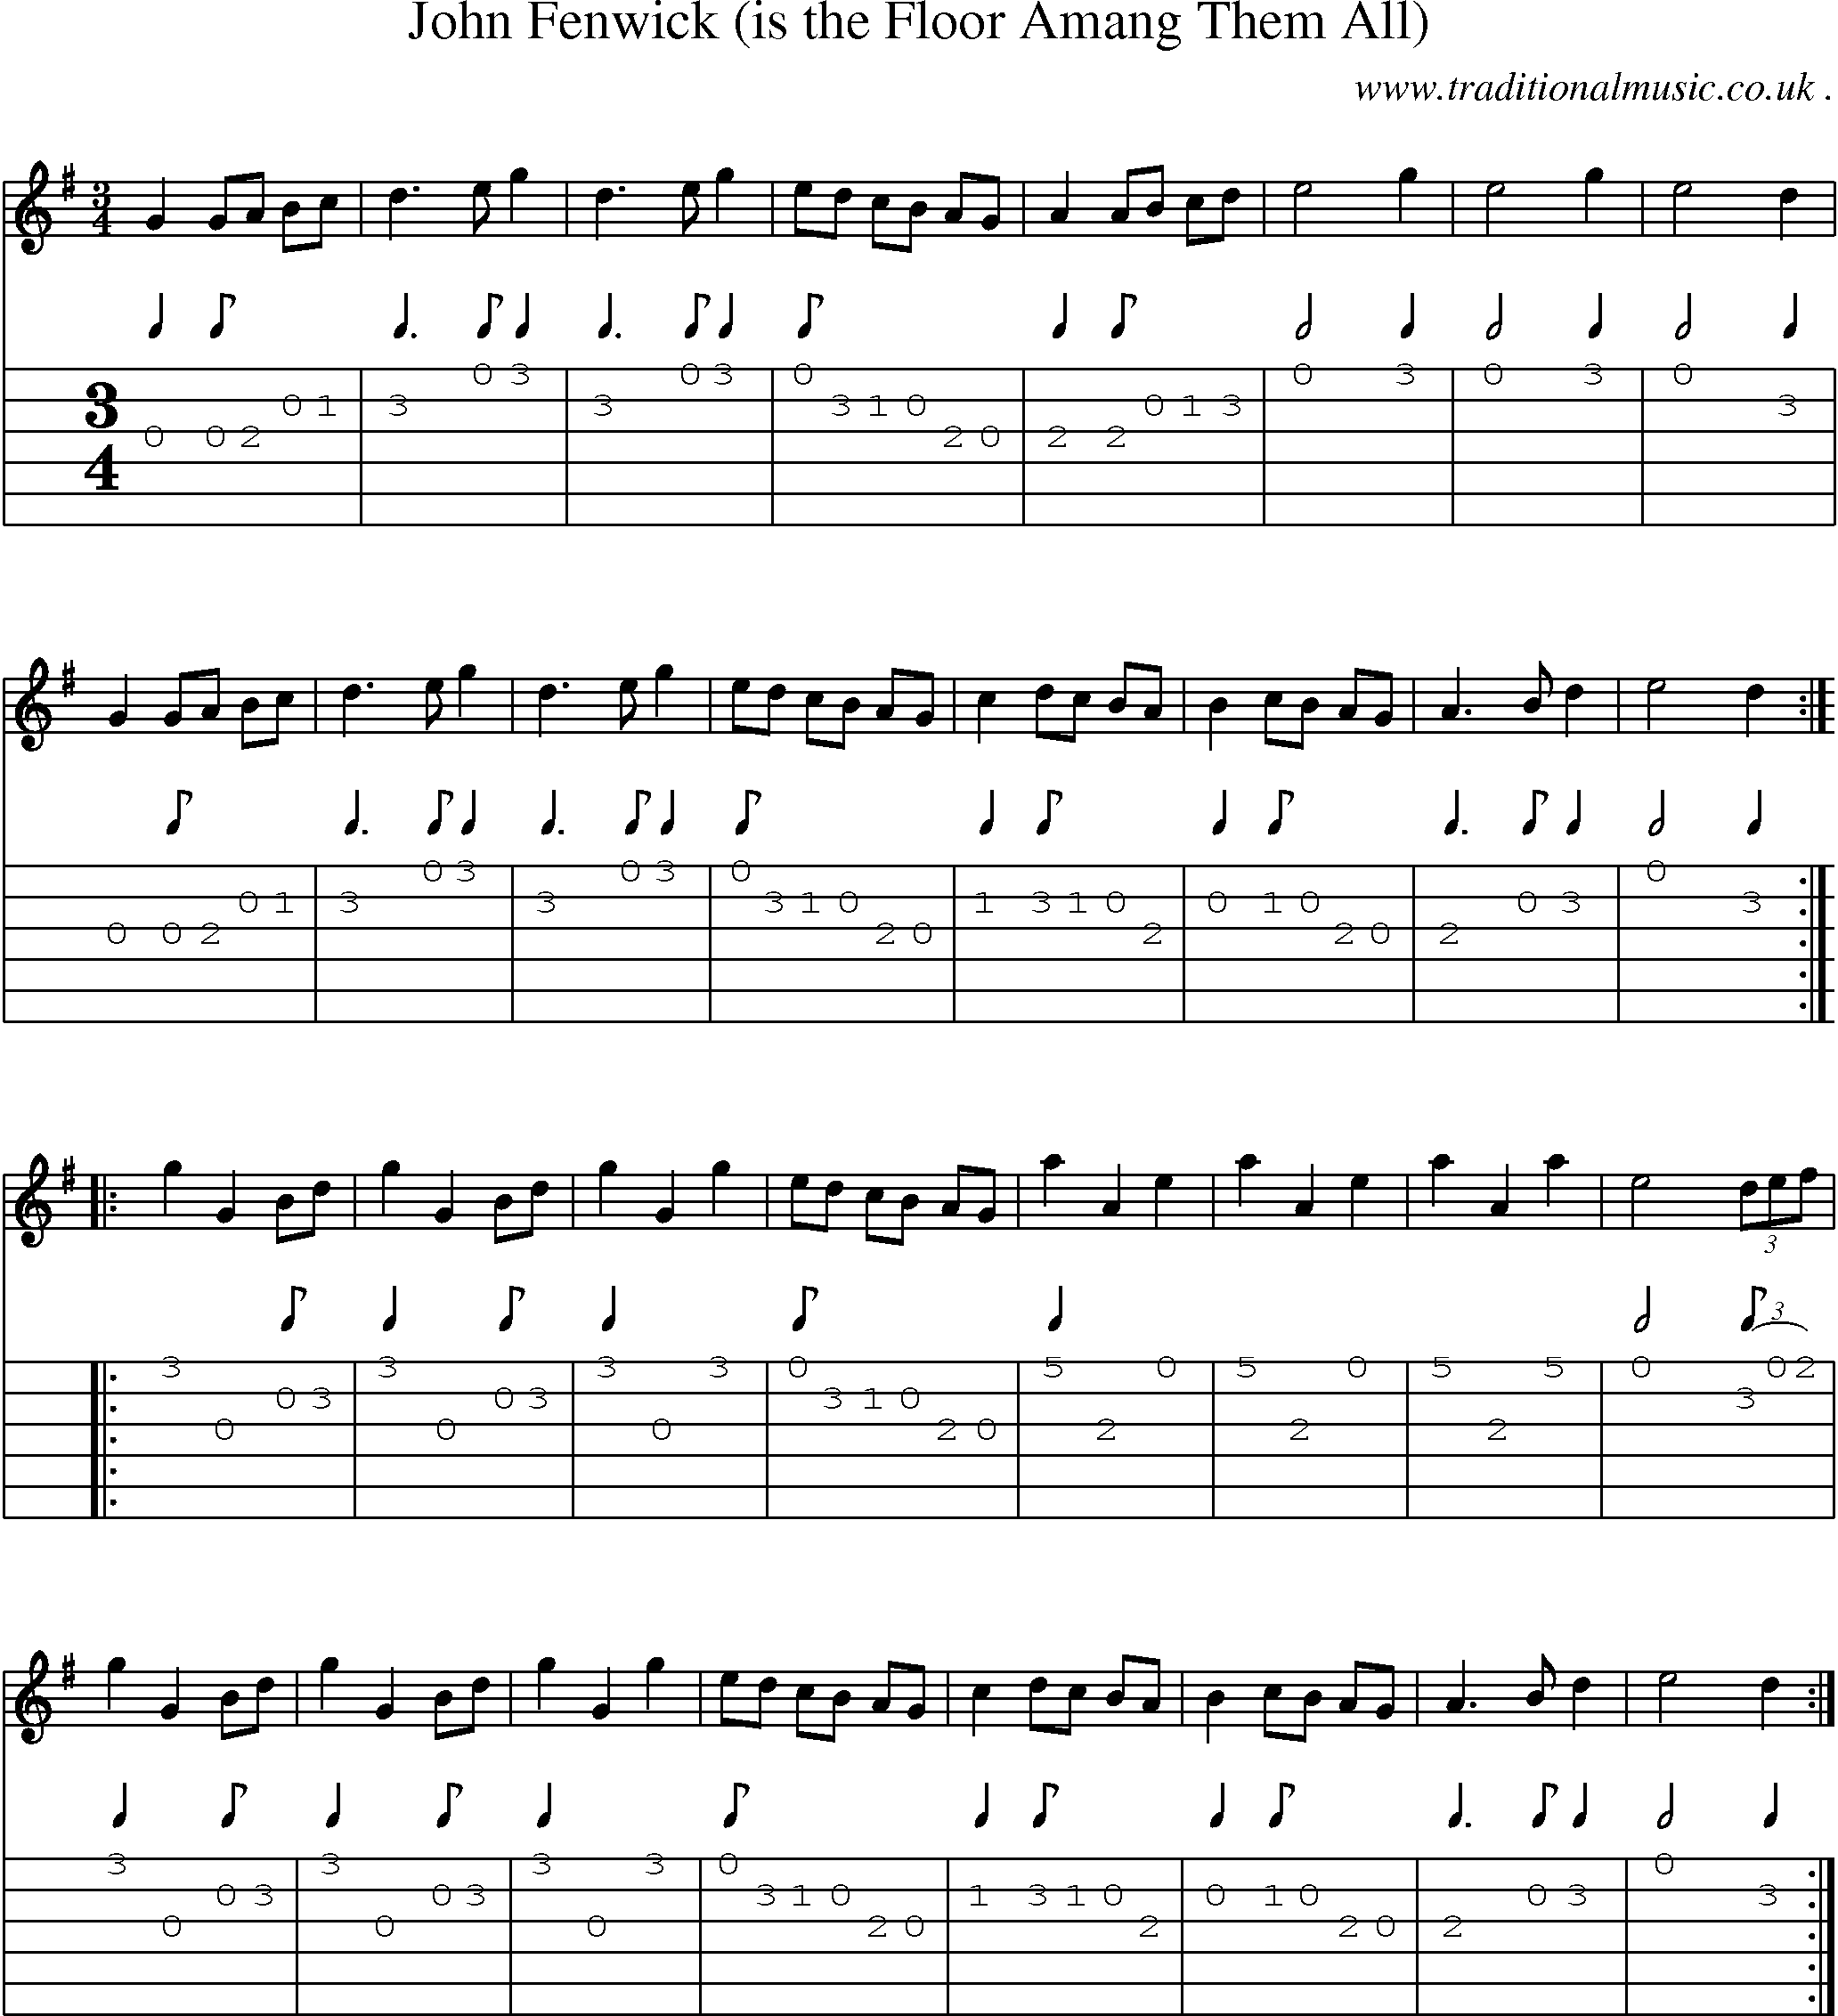 Sheet-Music and Guitar Tabs for John Fenwick (is The Floor Amang Them All)